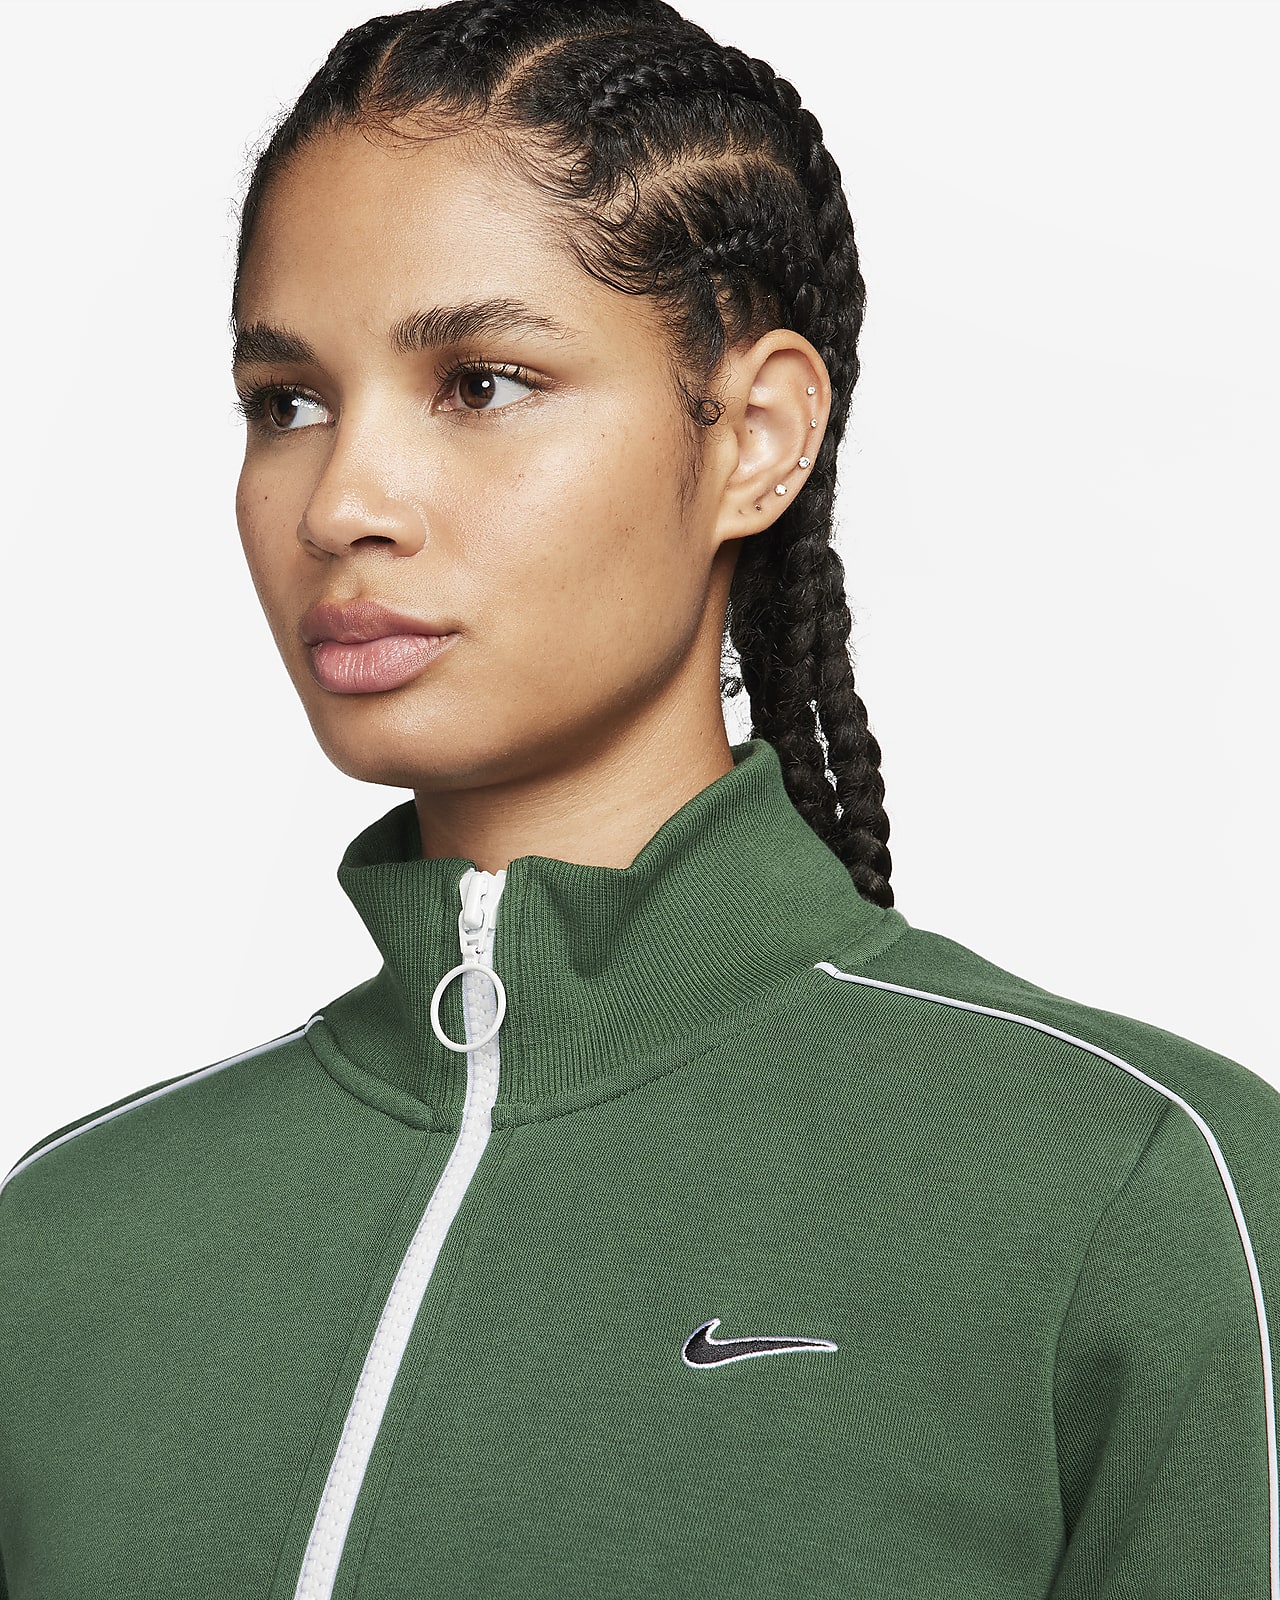 Buy Nike Academy 21 Tracksuit Women (DC2096) navy blue from £24.99 (Today)  – Best Deals on